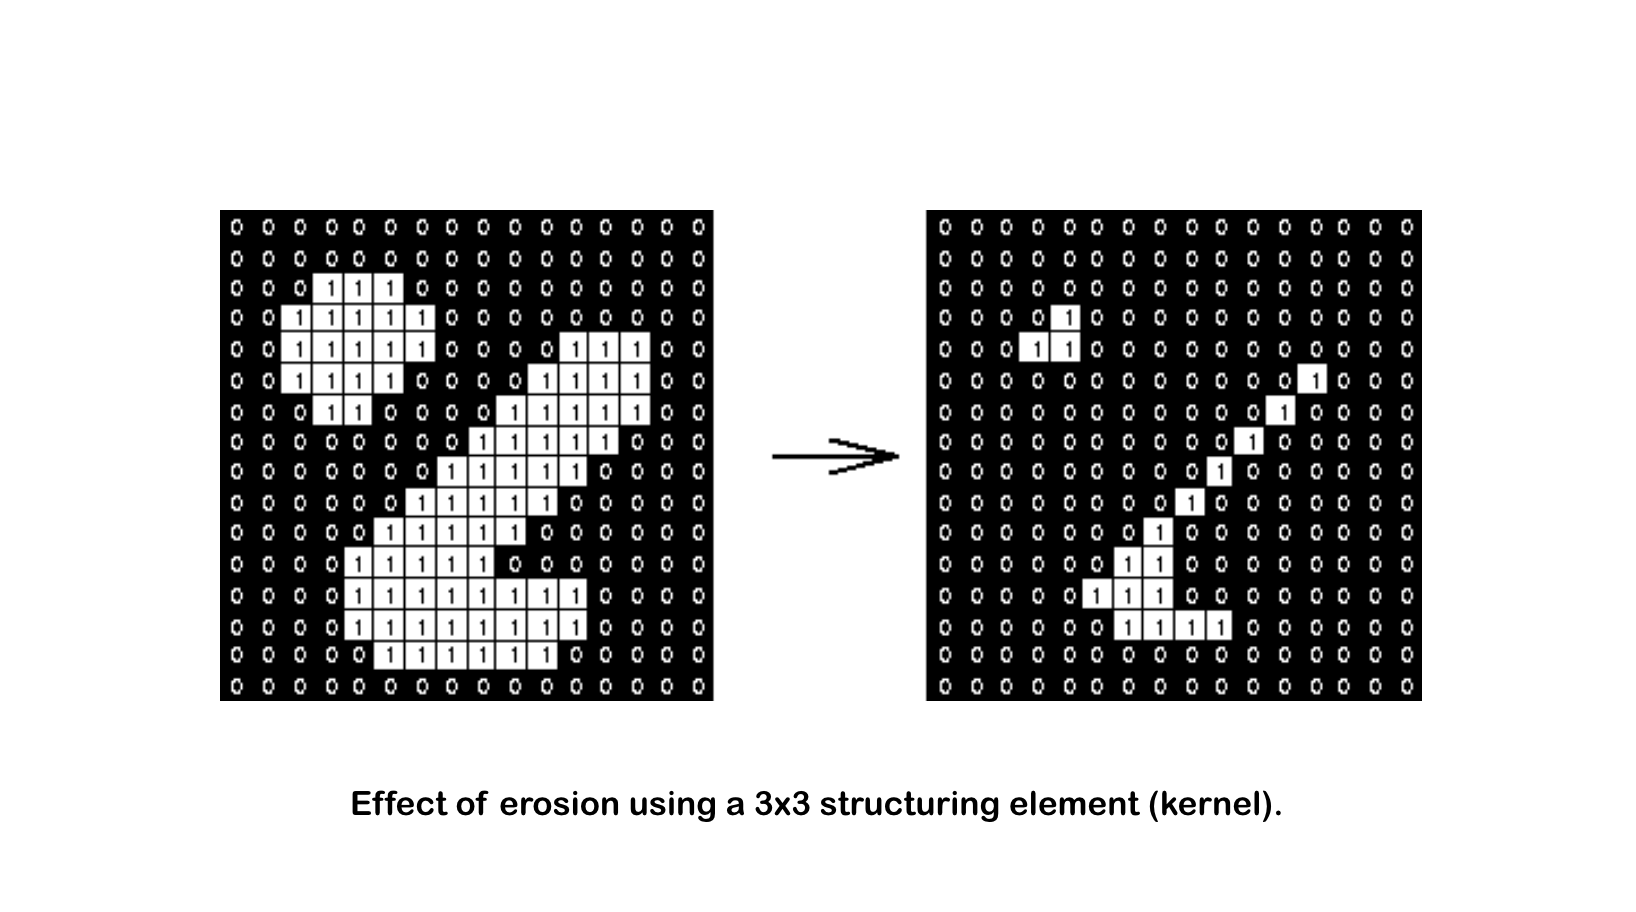 Effect of erosion using a 3x3 structuring element (kernel).